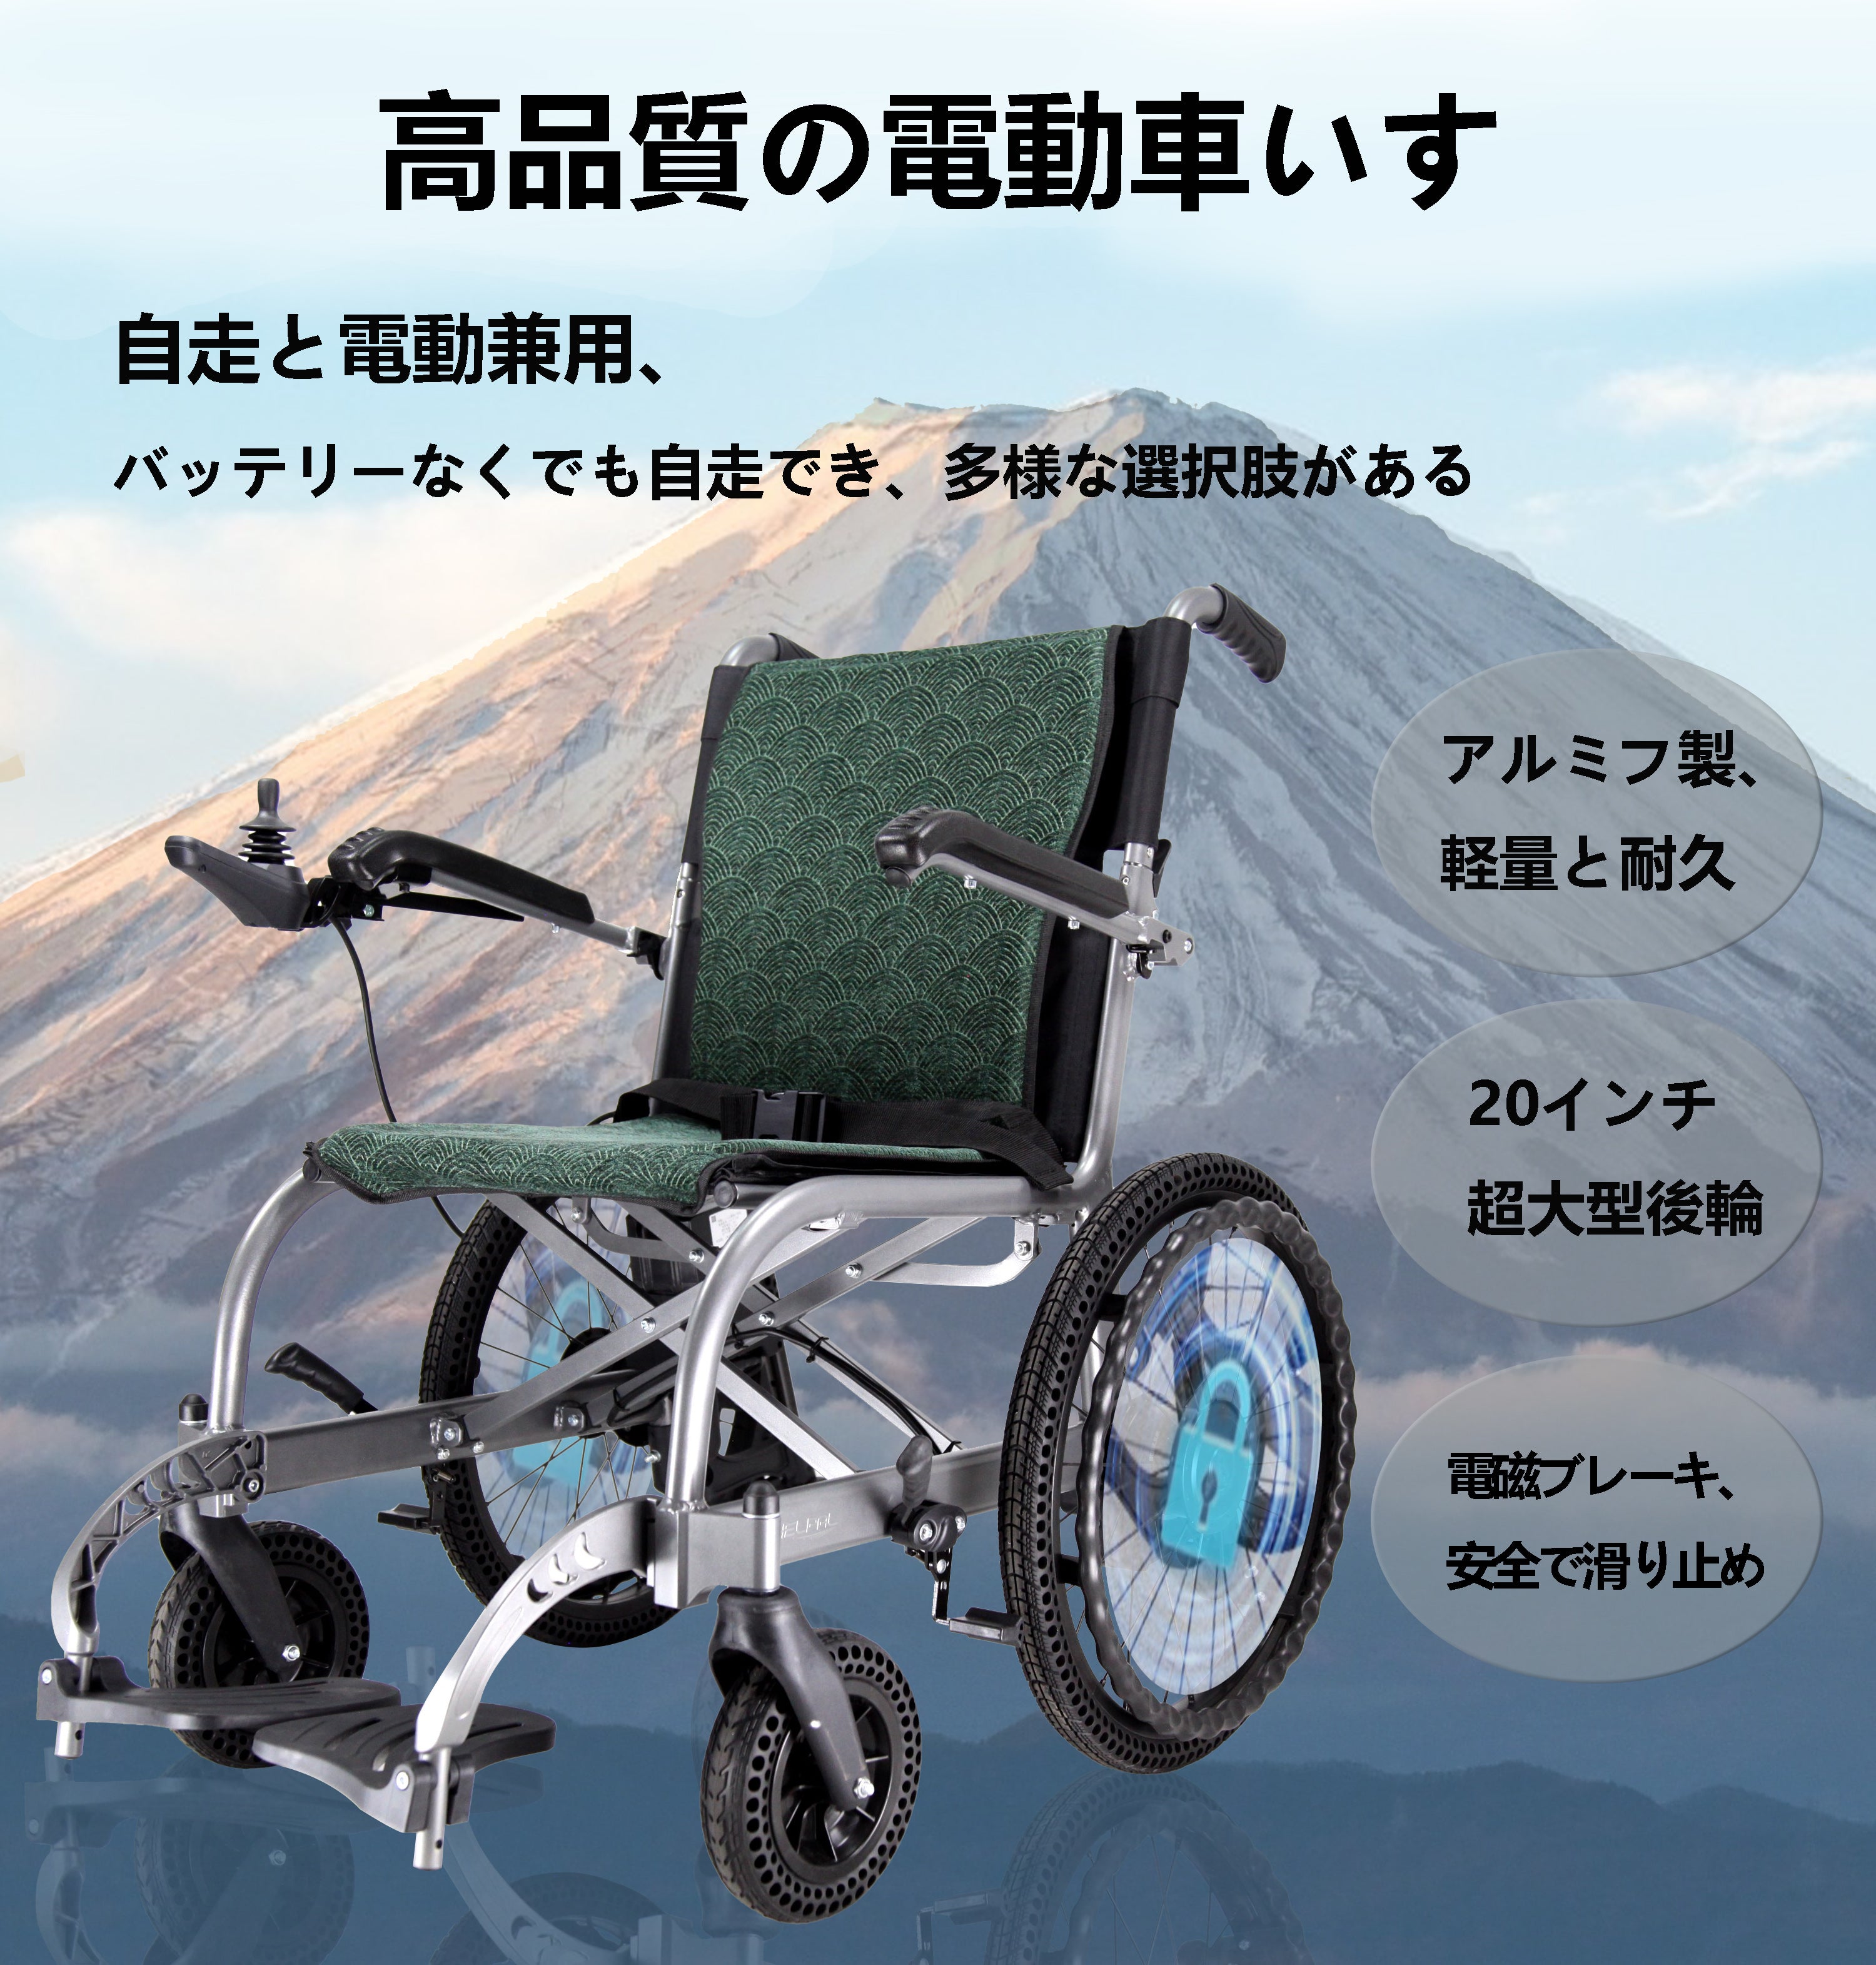 Care-Parents 電動車椅子 折りたたみ式車いす 電磁自動ブレーキ 介助・自走 兼用 (CP-D3E)